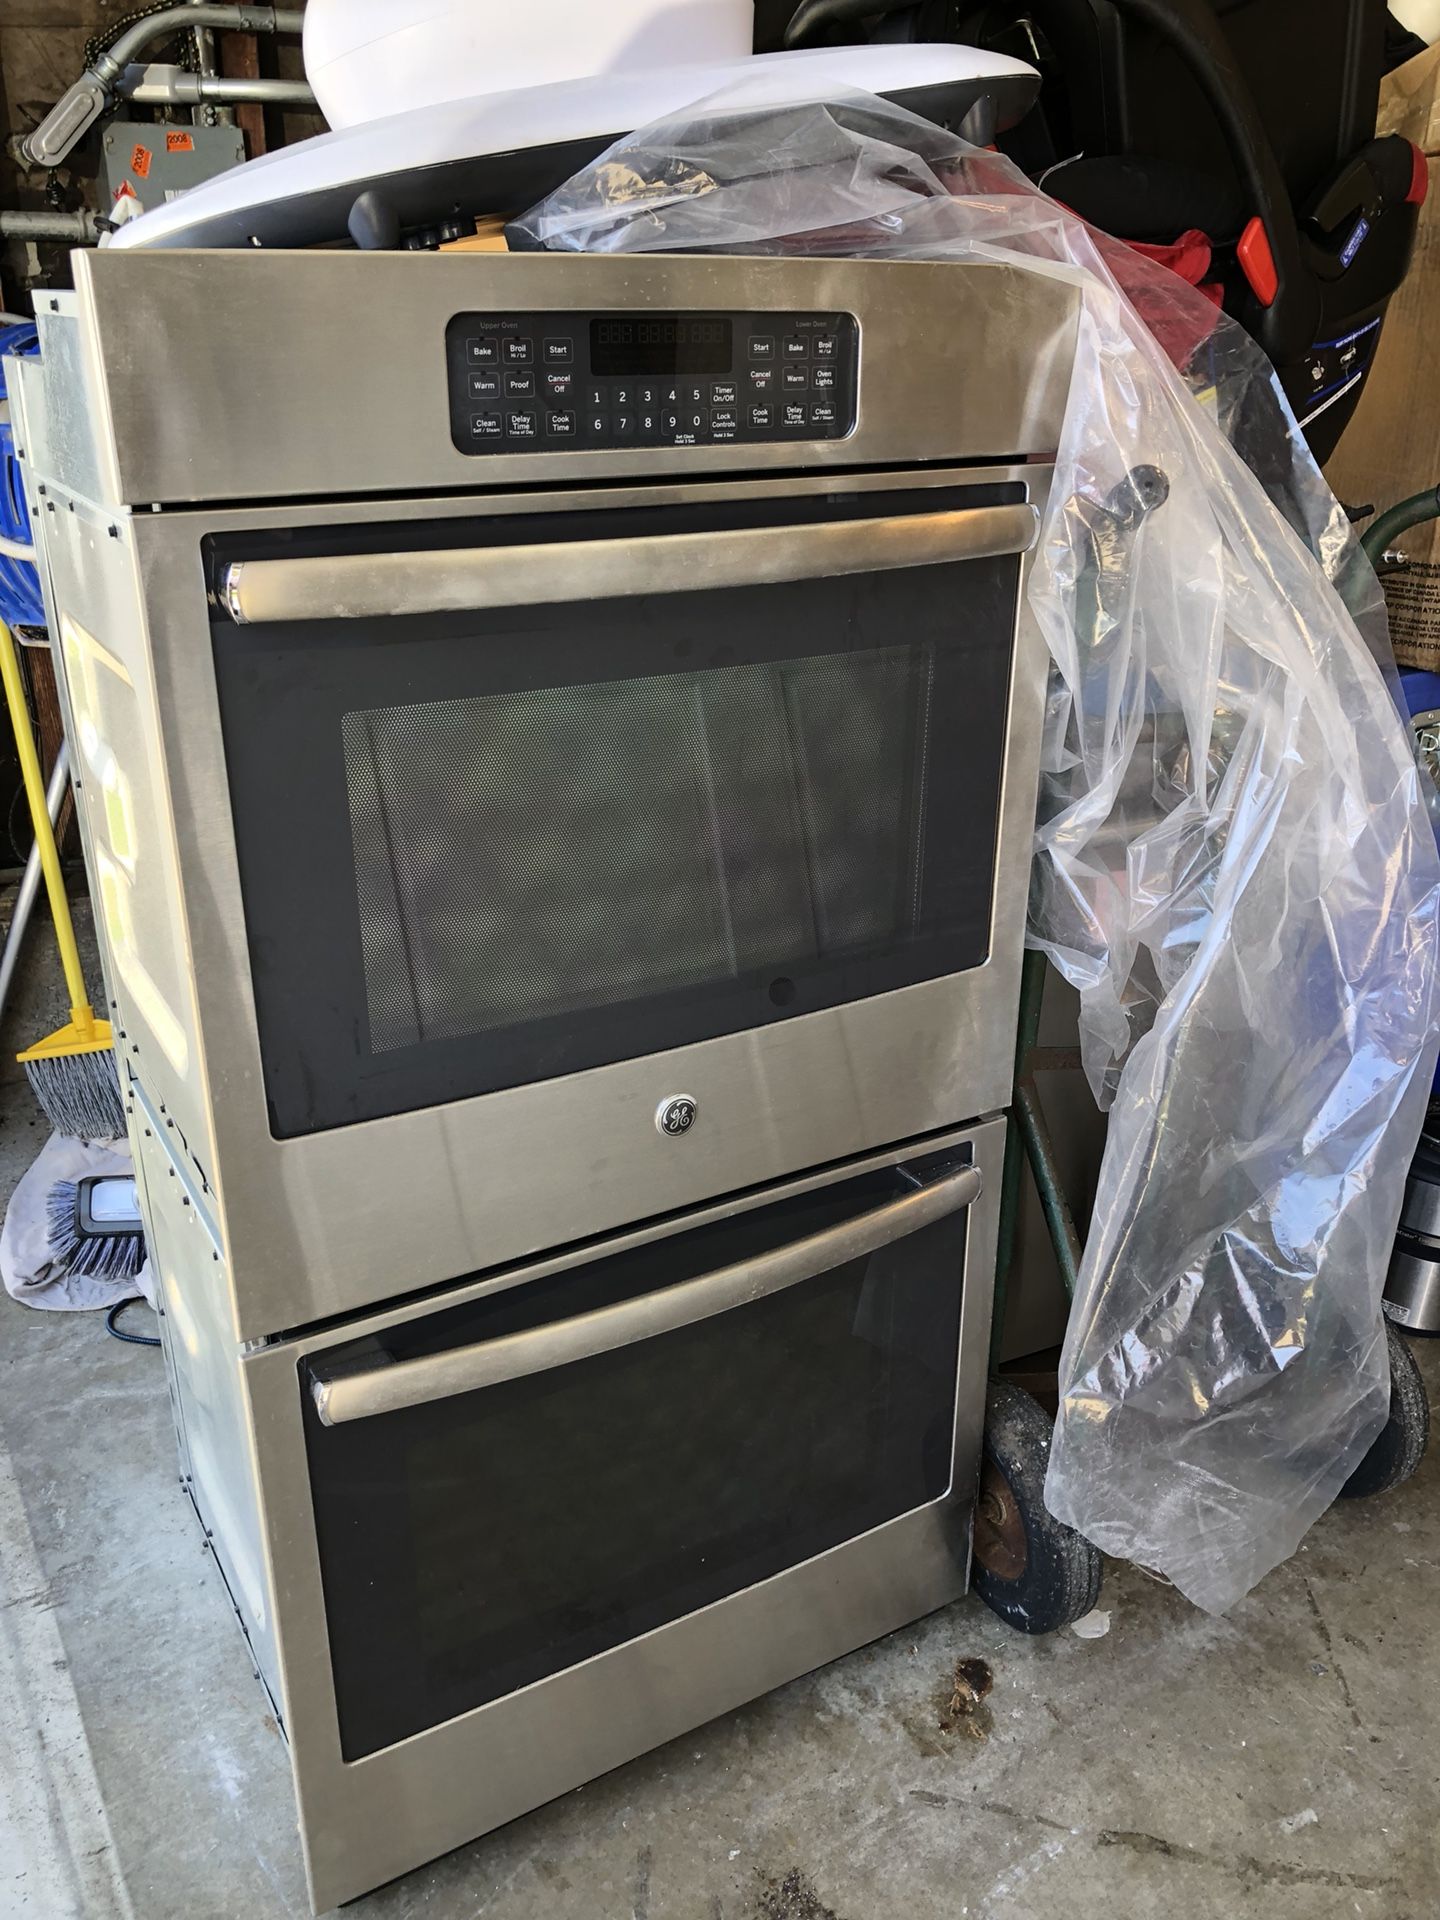 GE DOUBLE WALL OVEN used gently for two years